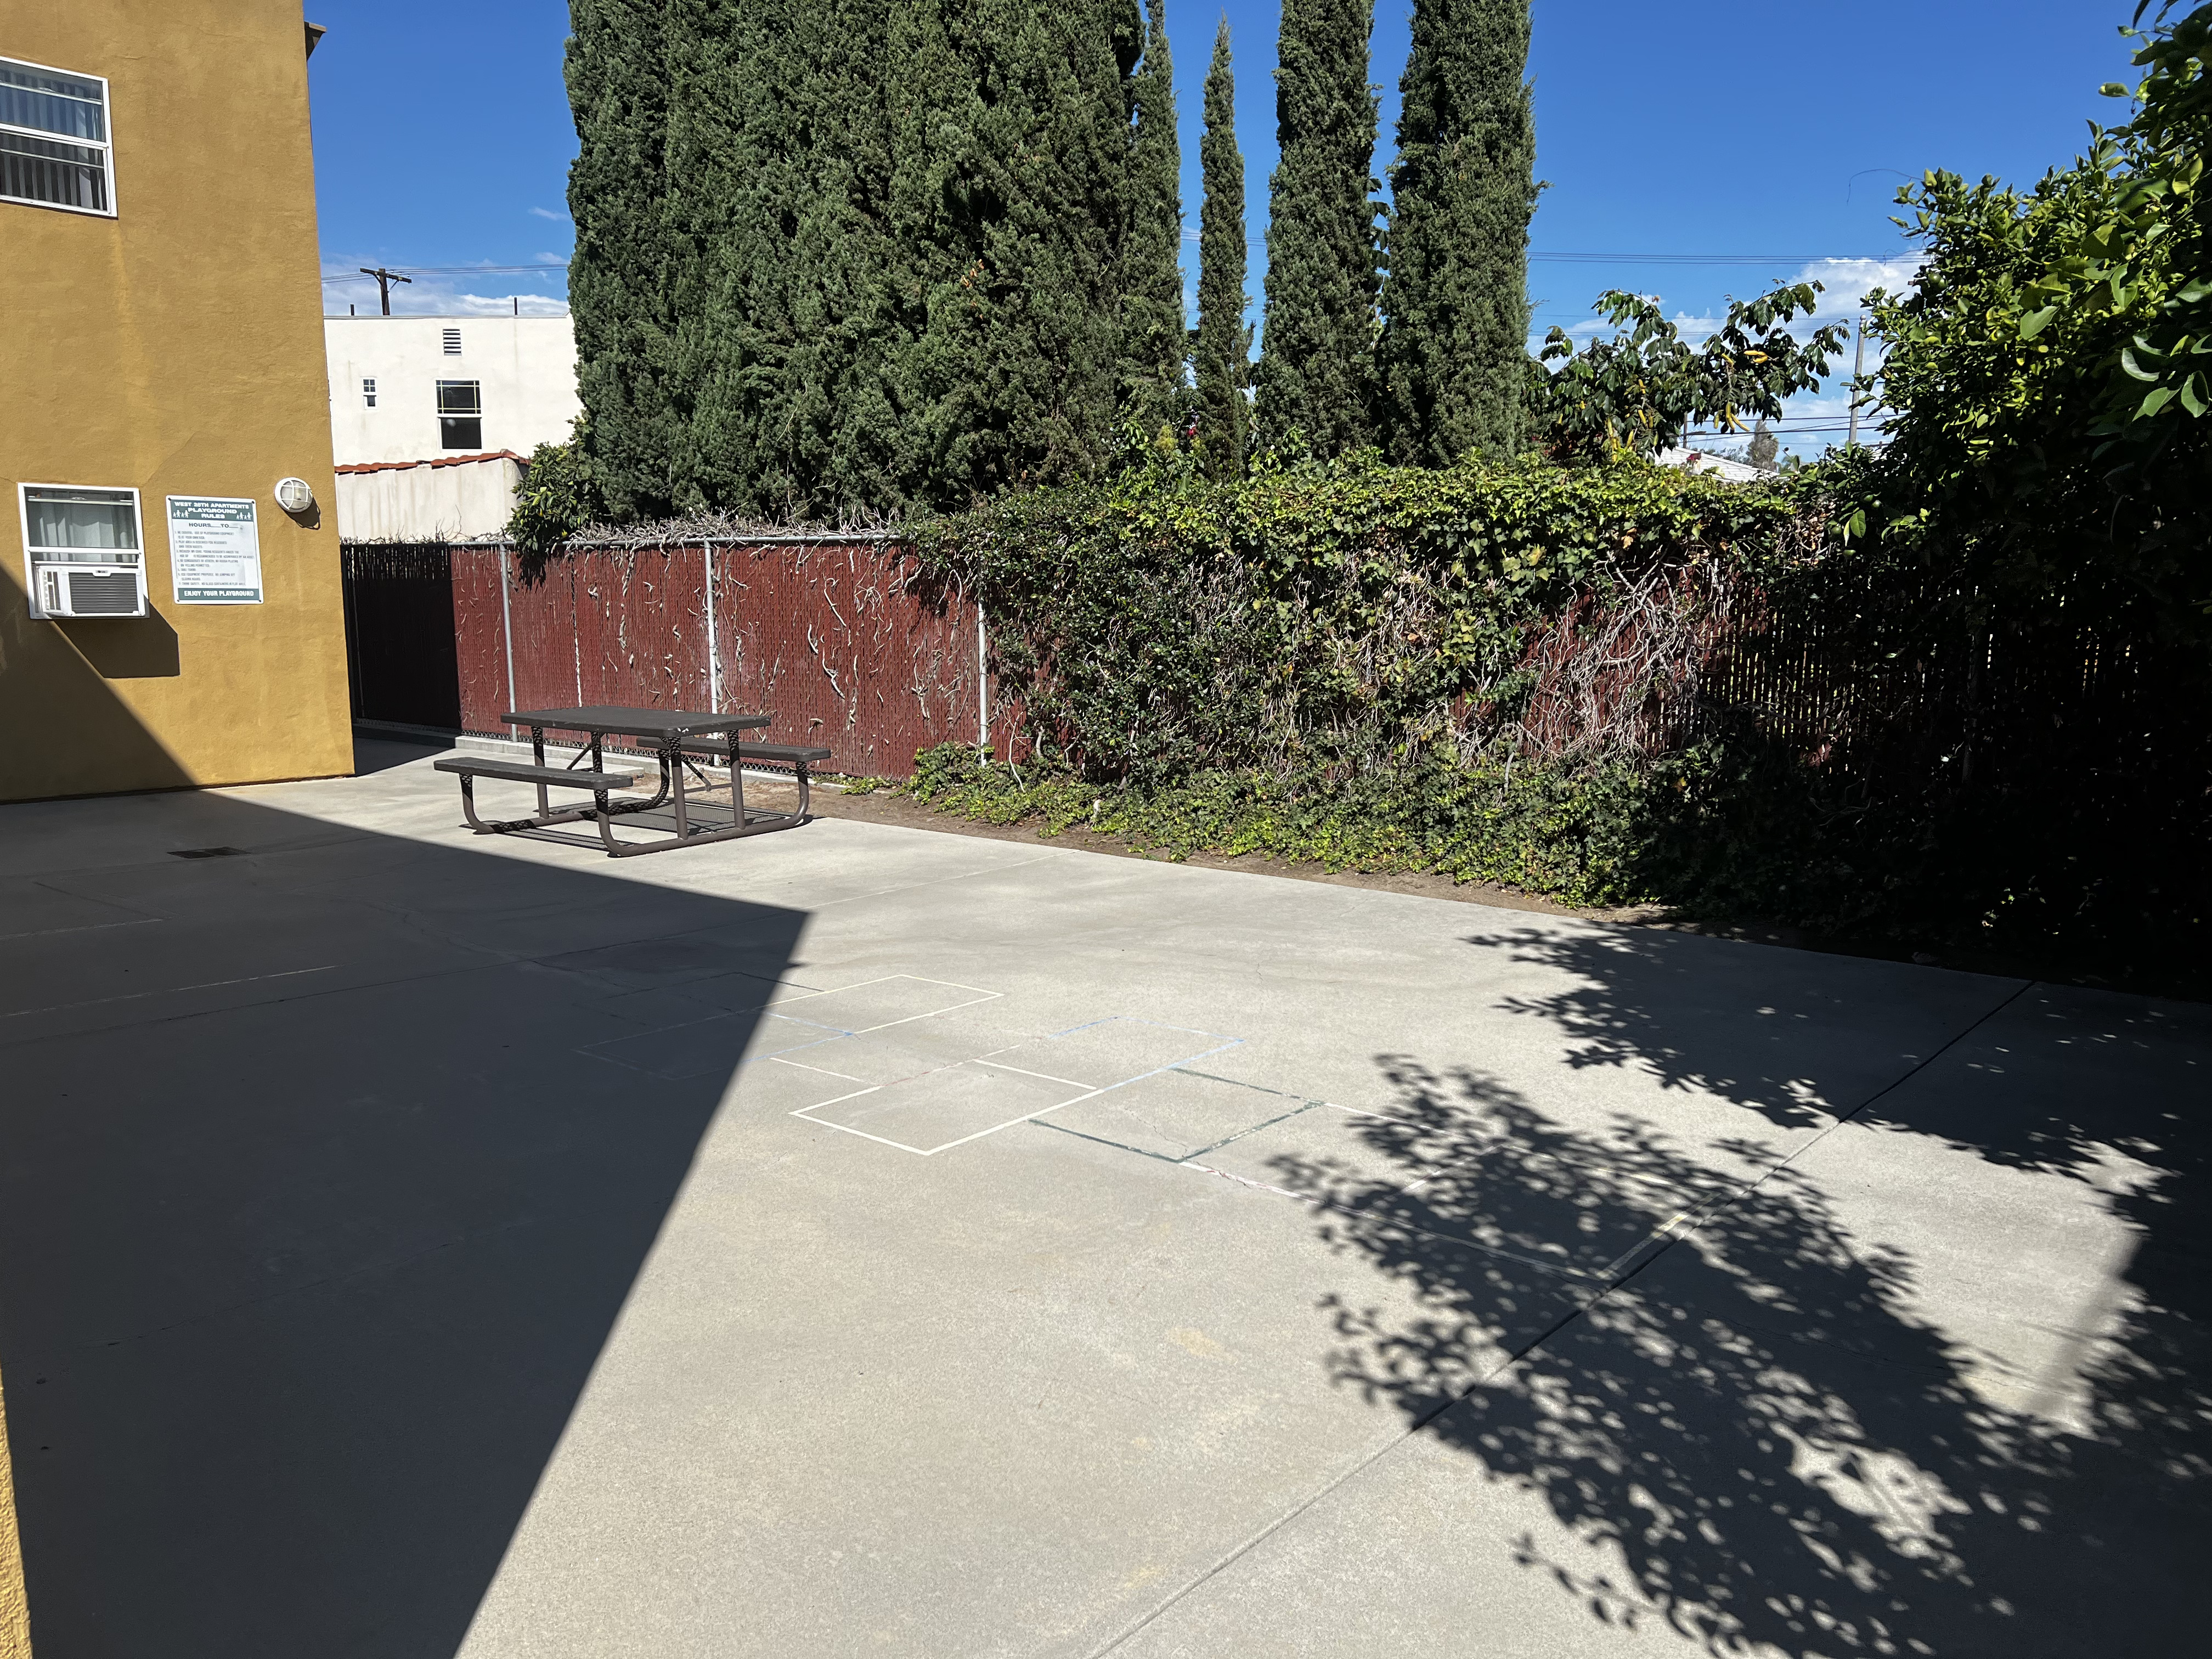 Community outdoor space with one picnic table